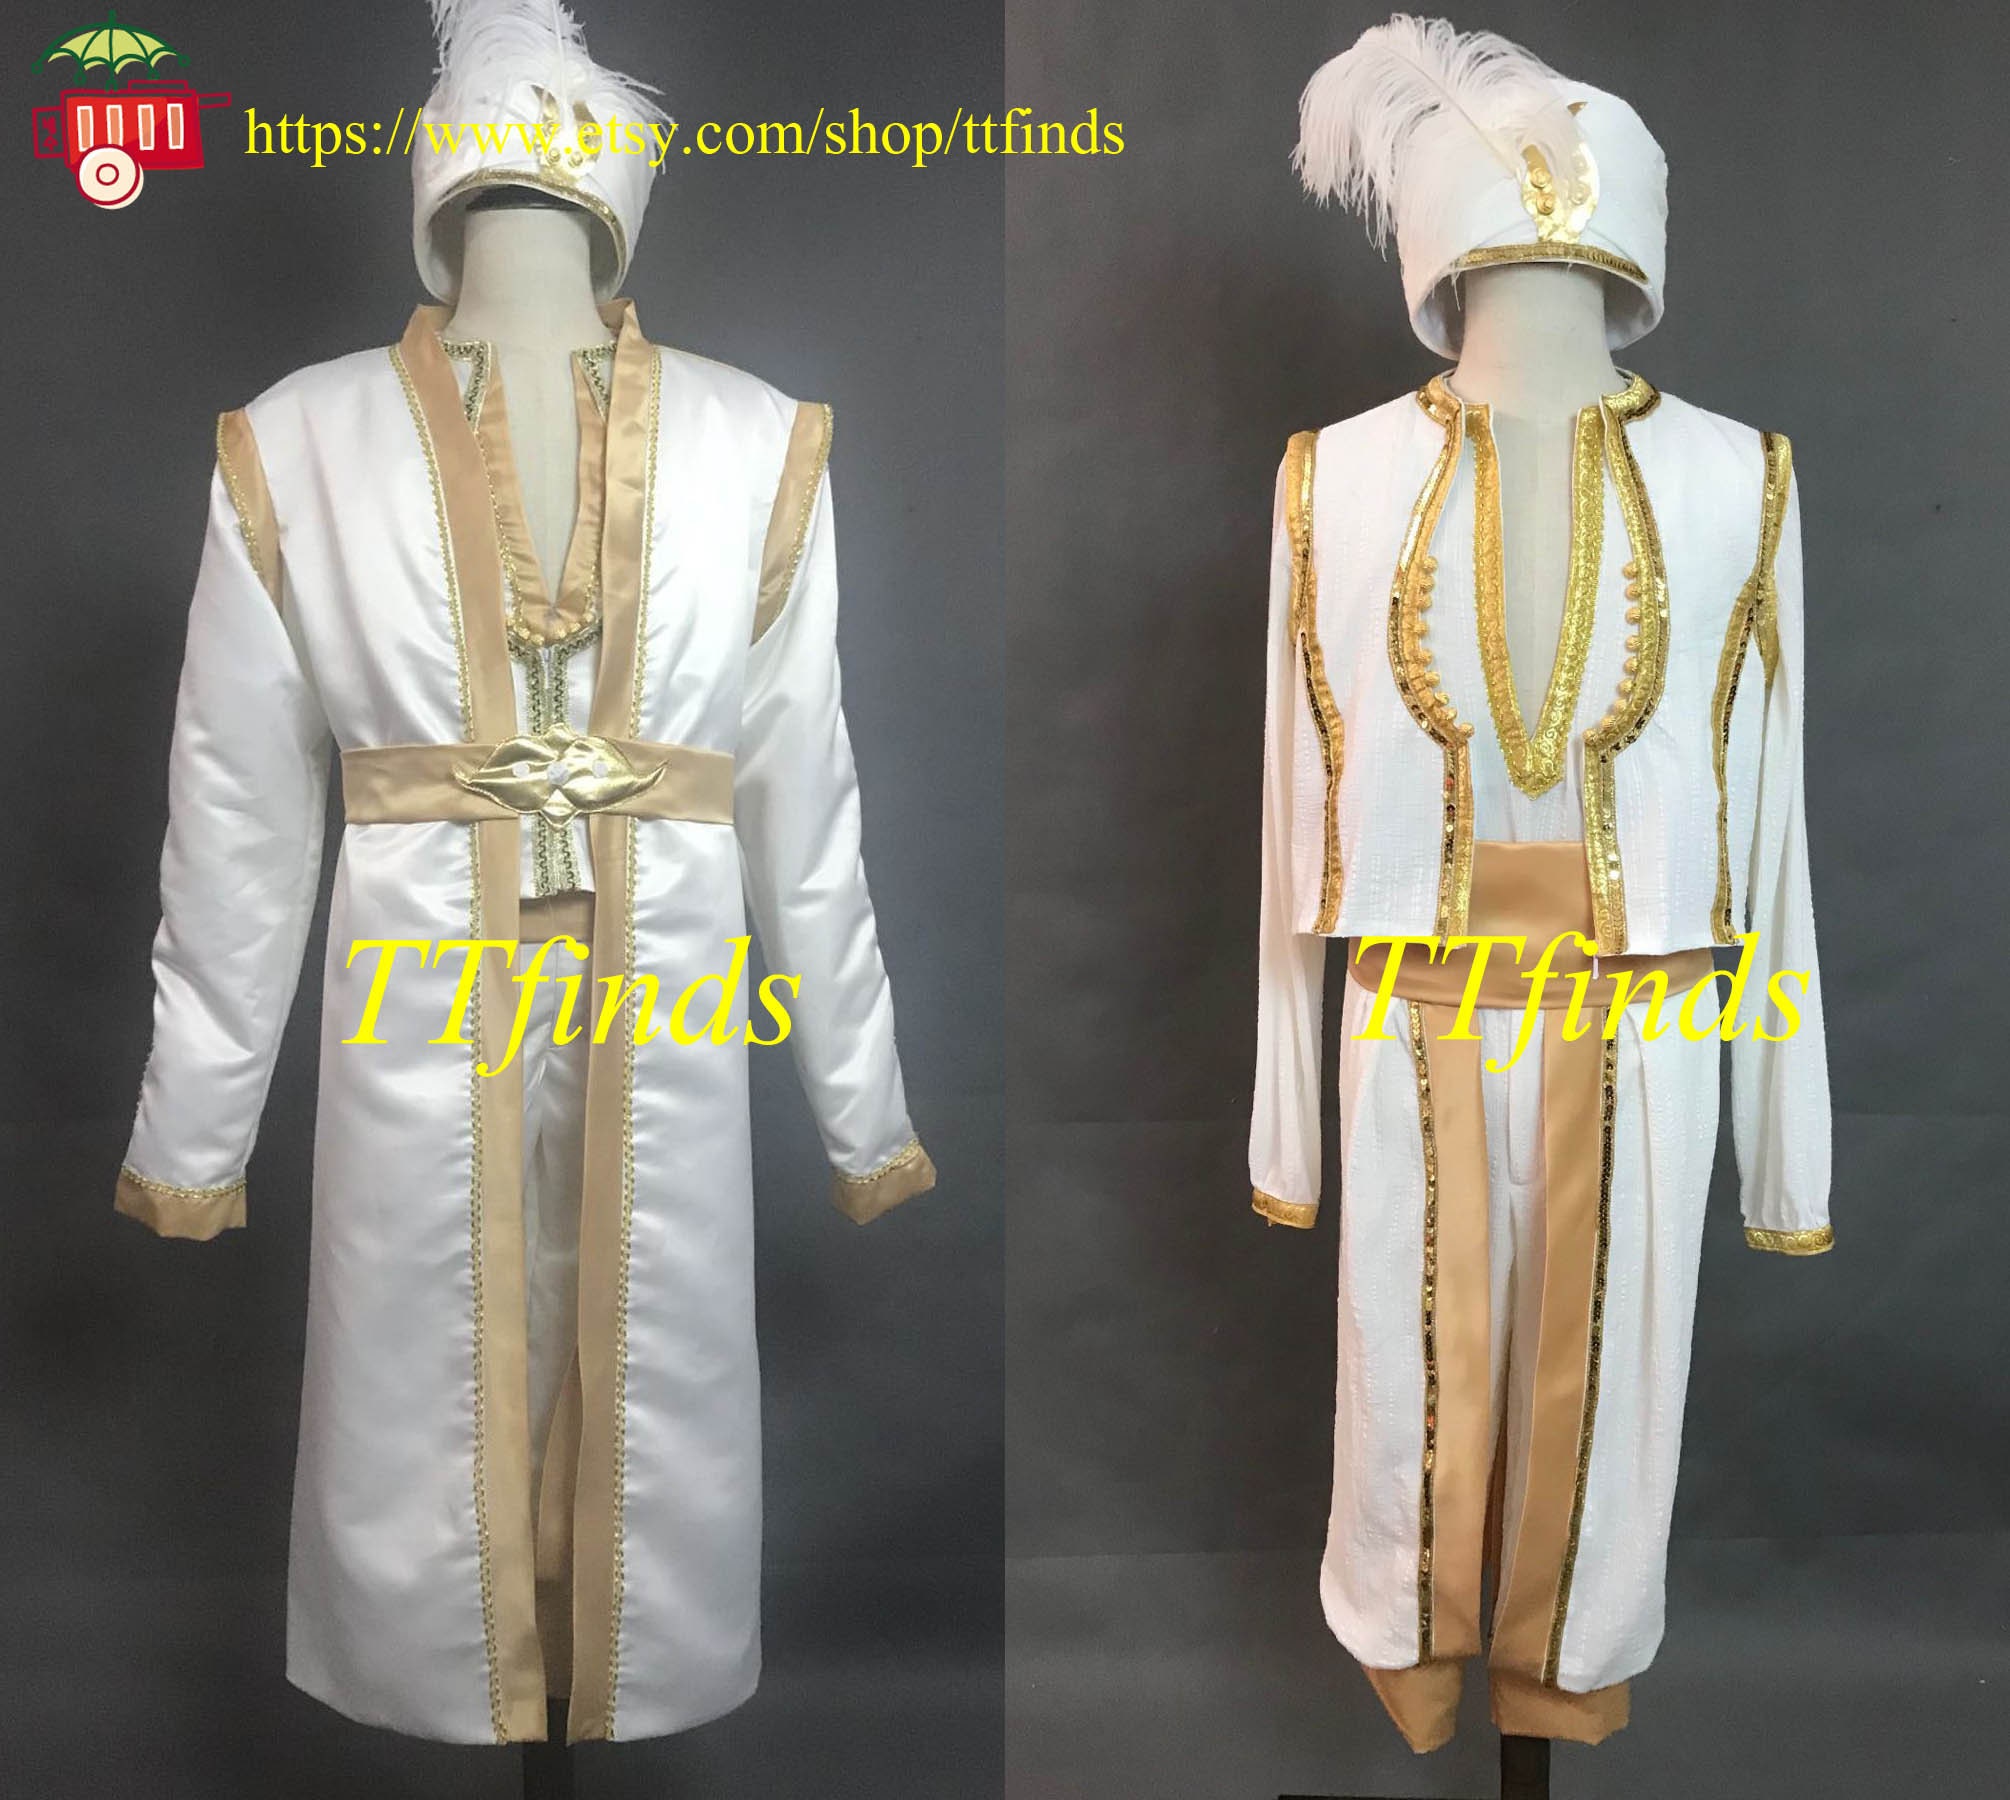 For the Aladdin Prince Cosplay Arabian Outfit Costume Aladdin - Etsy Denmark